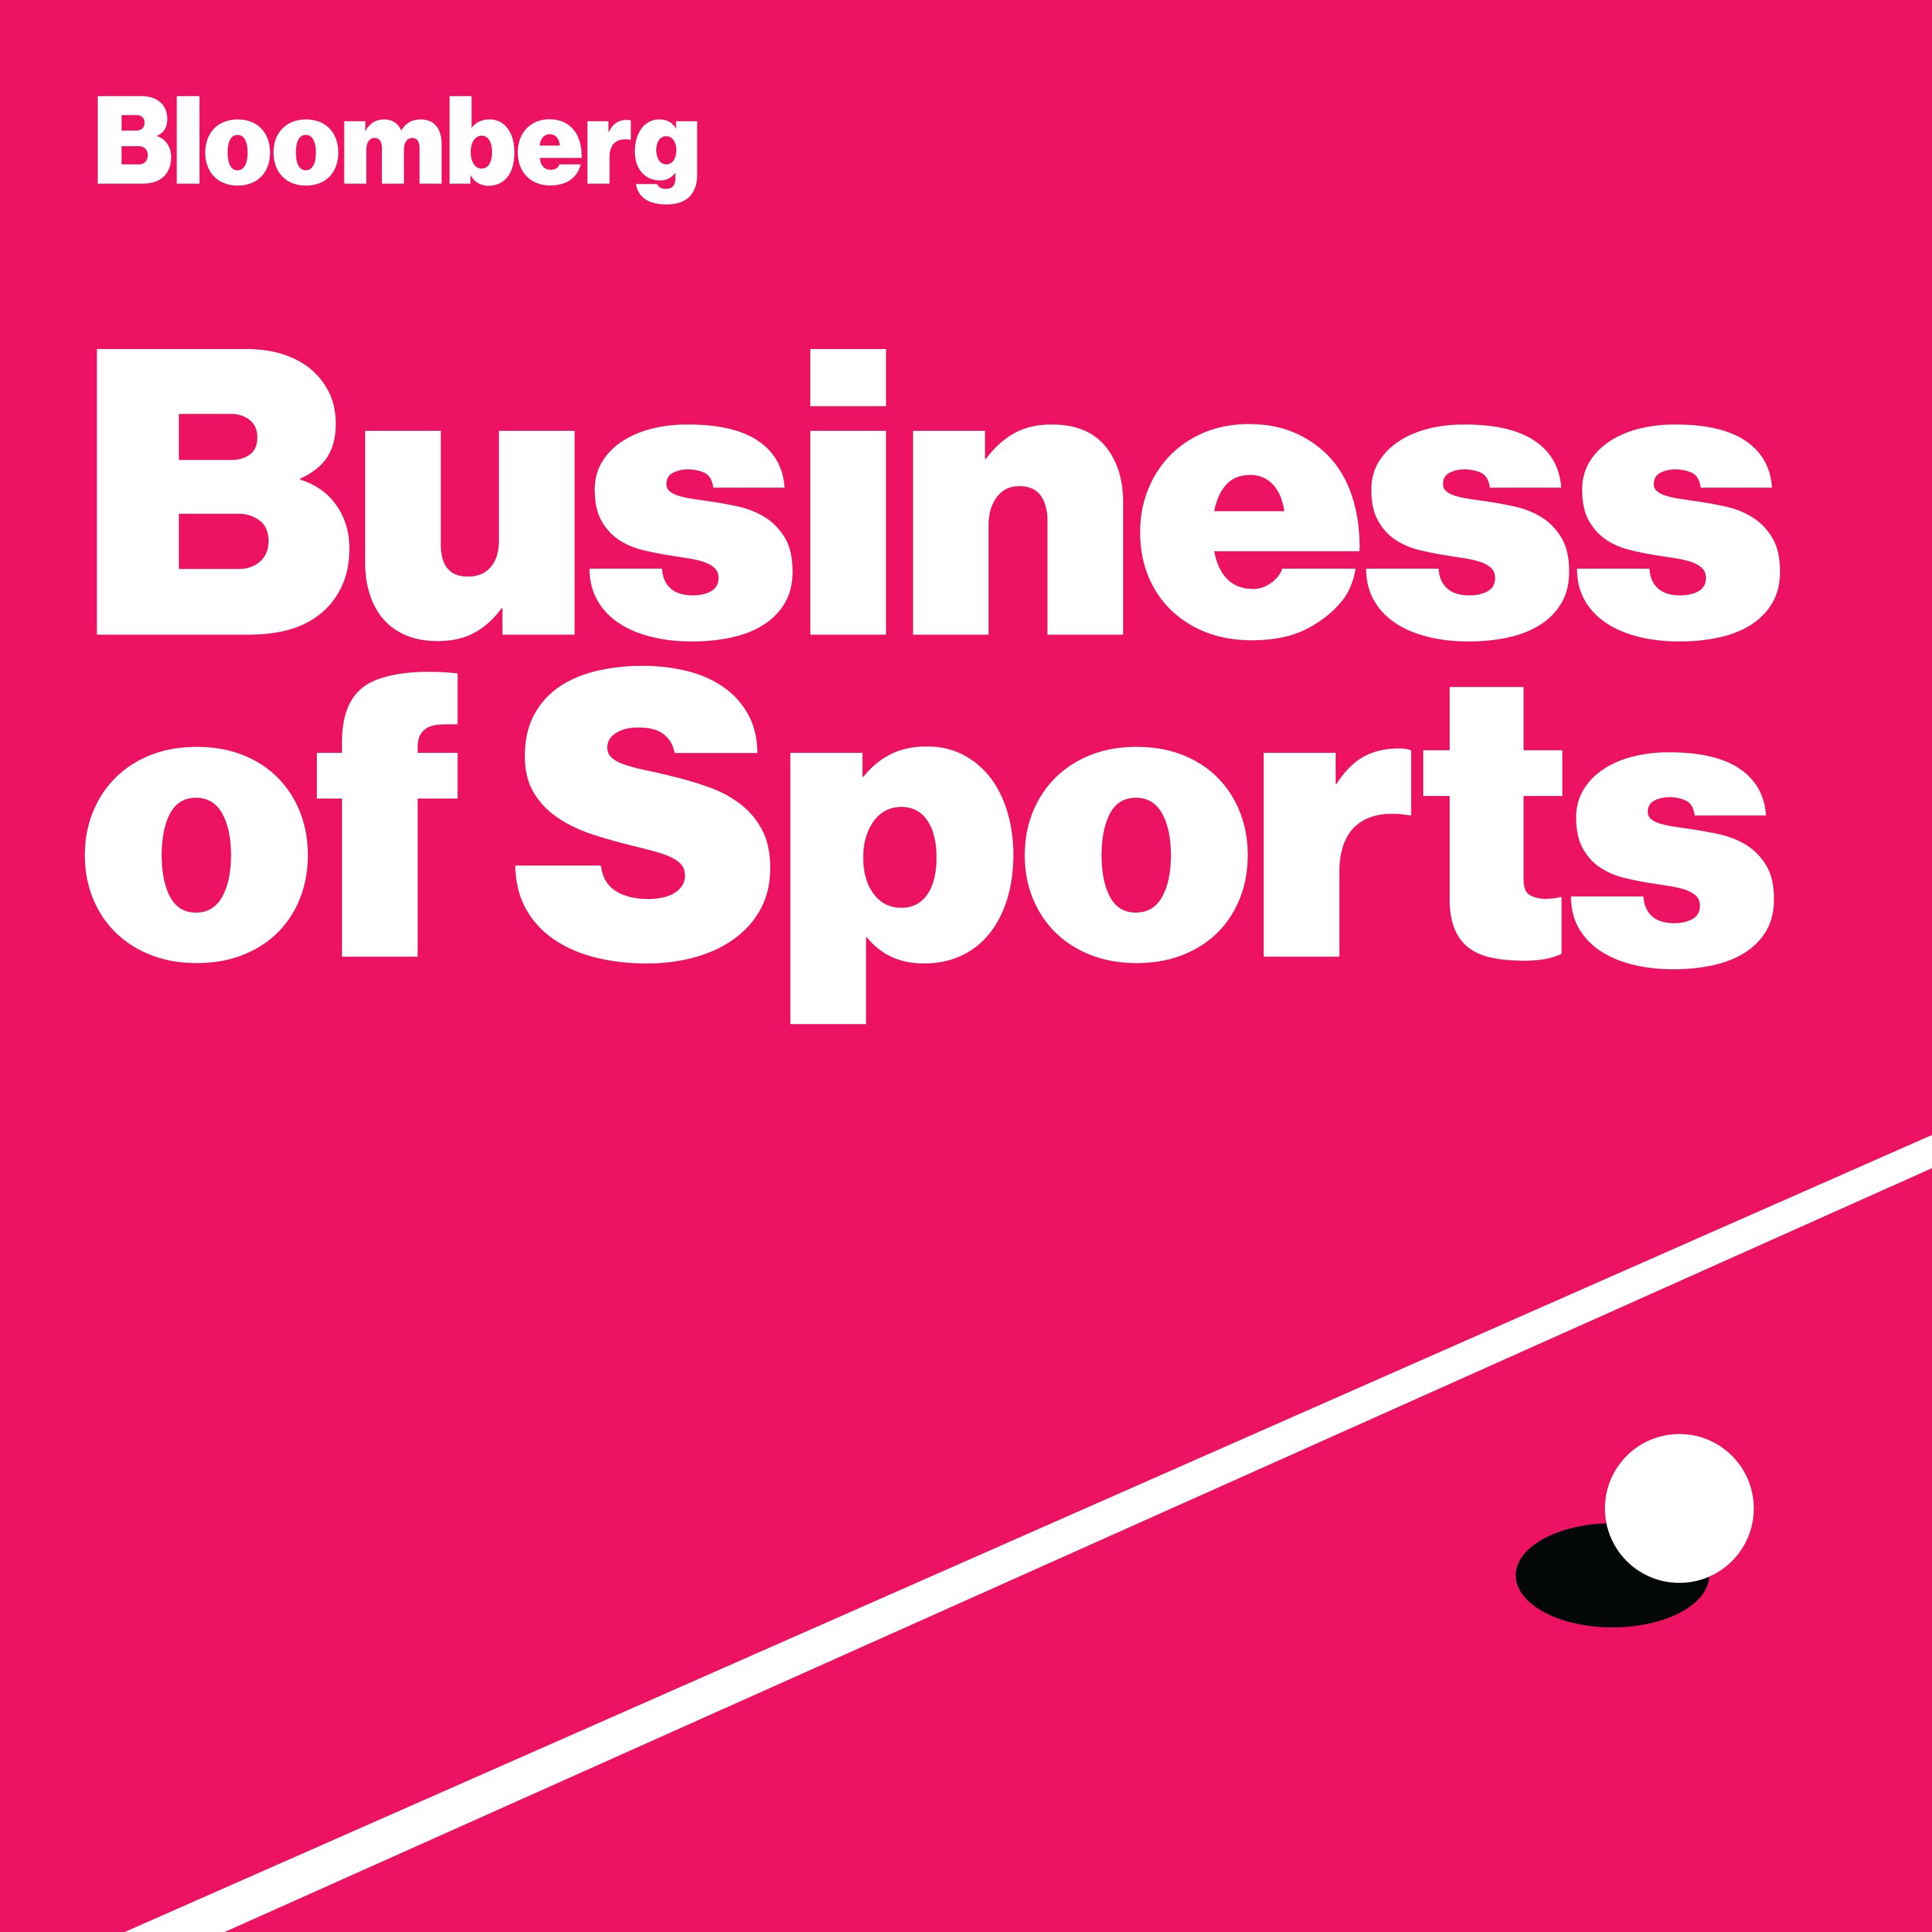 Super Bowl Ads, Foles, The Winter Games: Sports Business